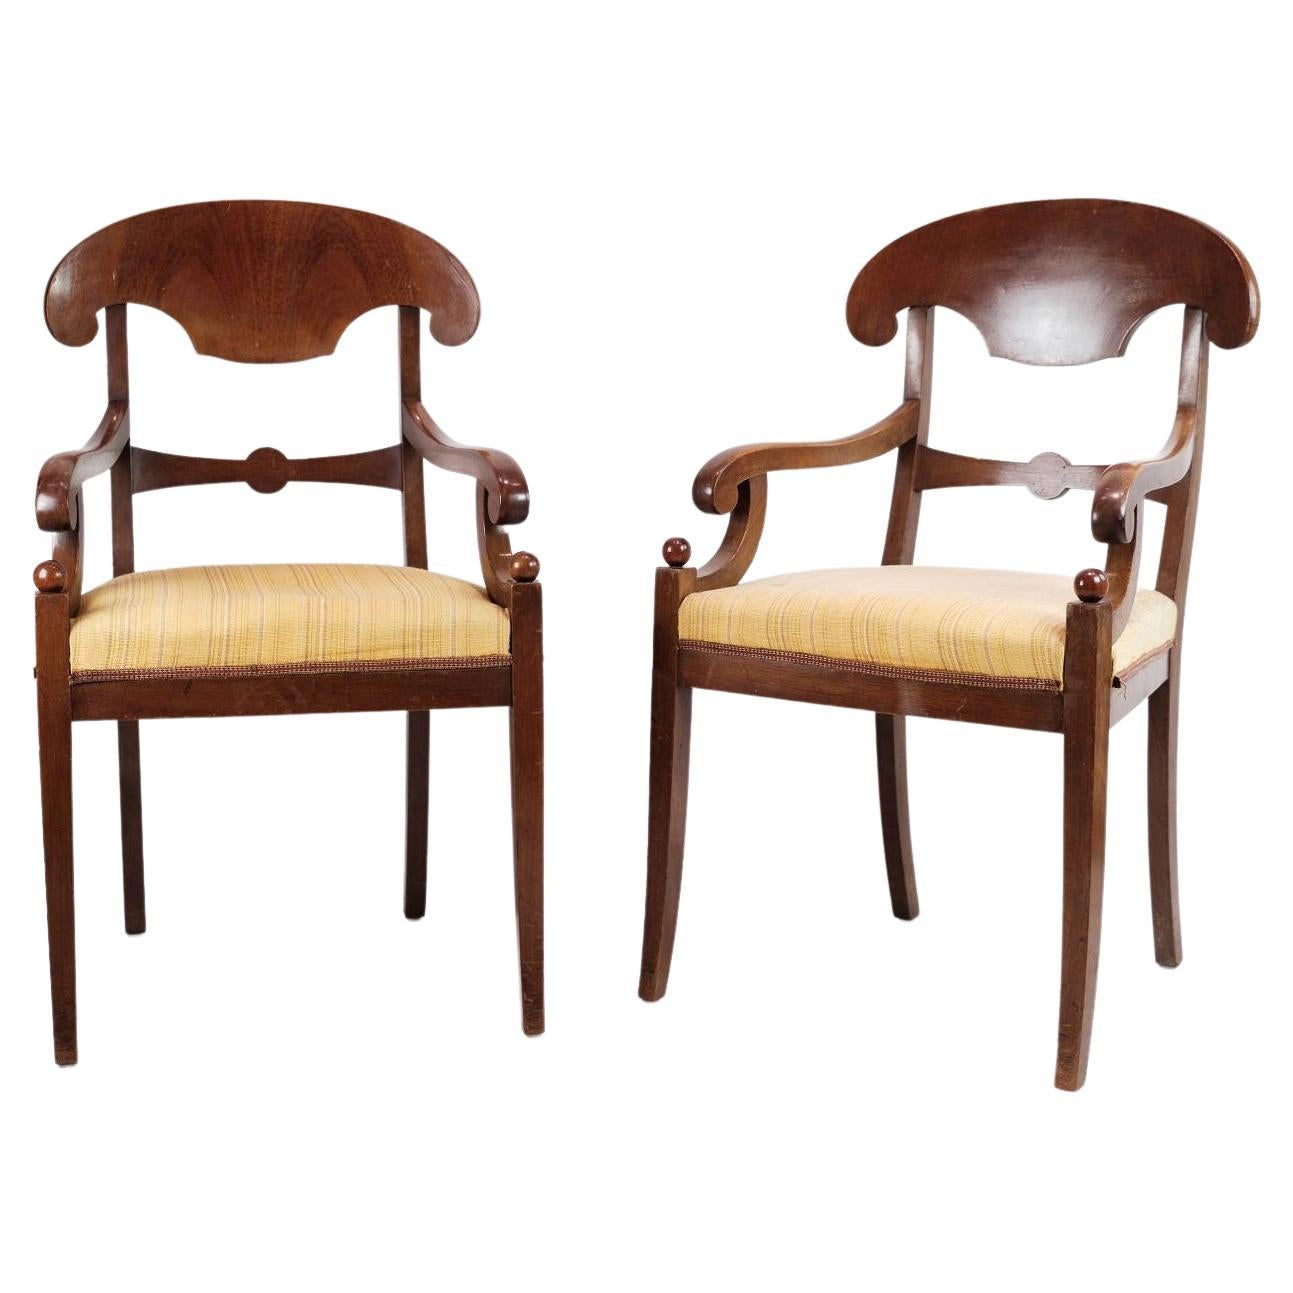 Set Of 2 Armchairs Made In Mahogany With Light Fabric From 1860s